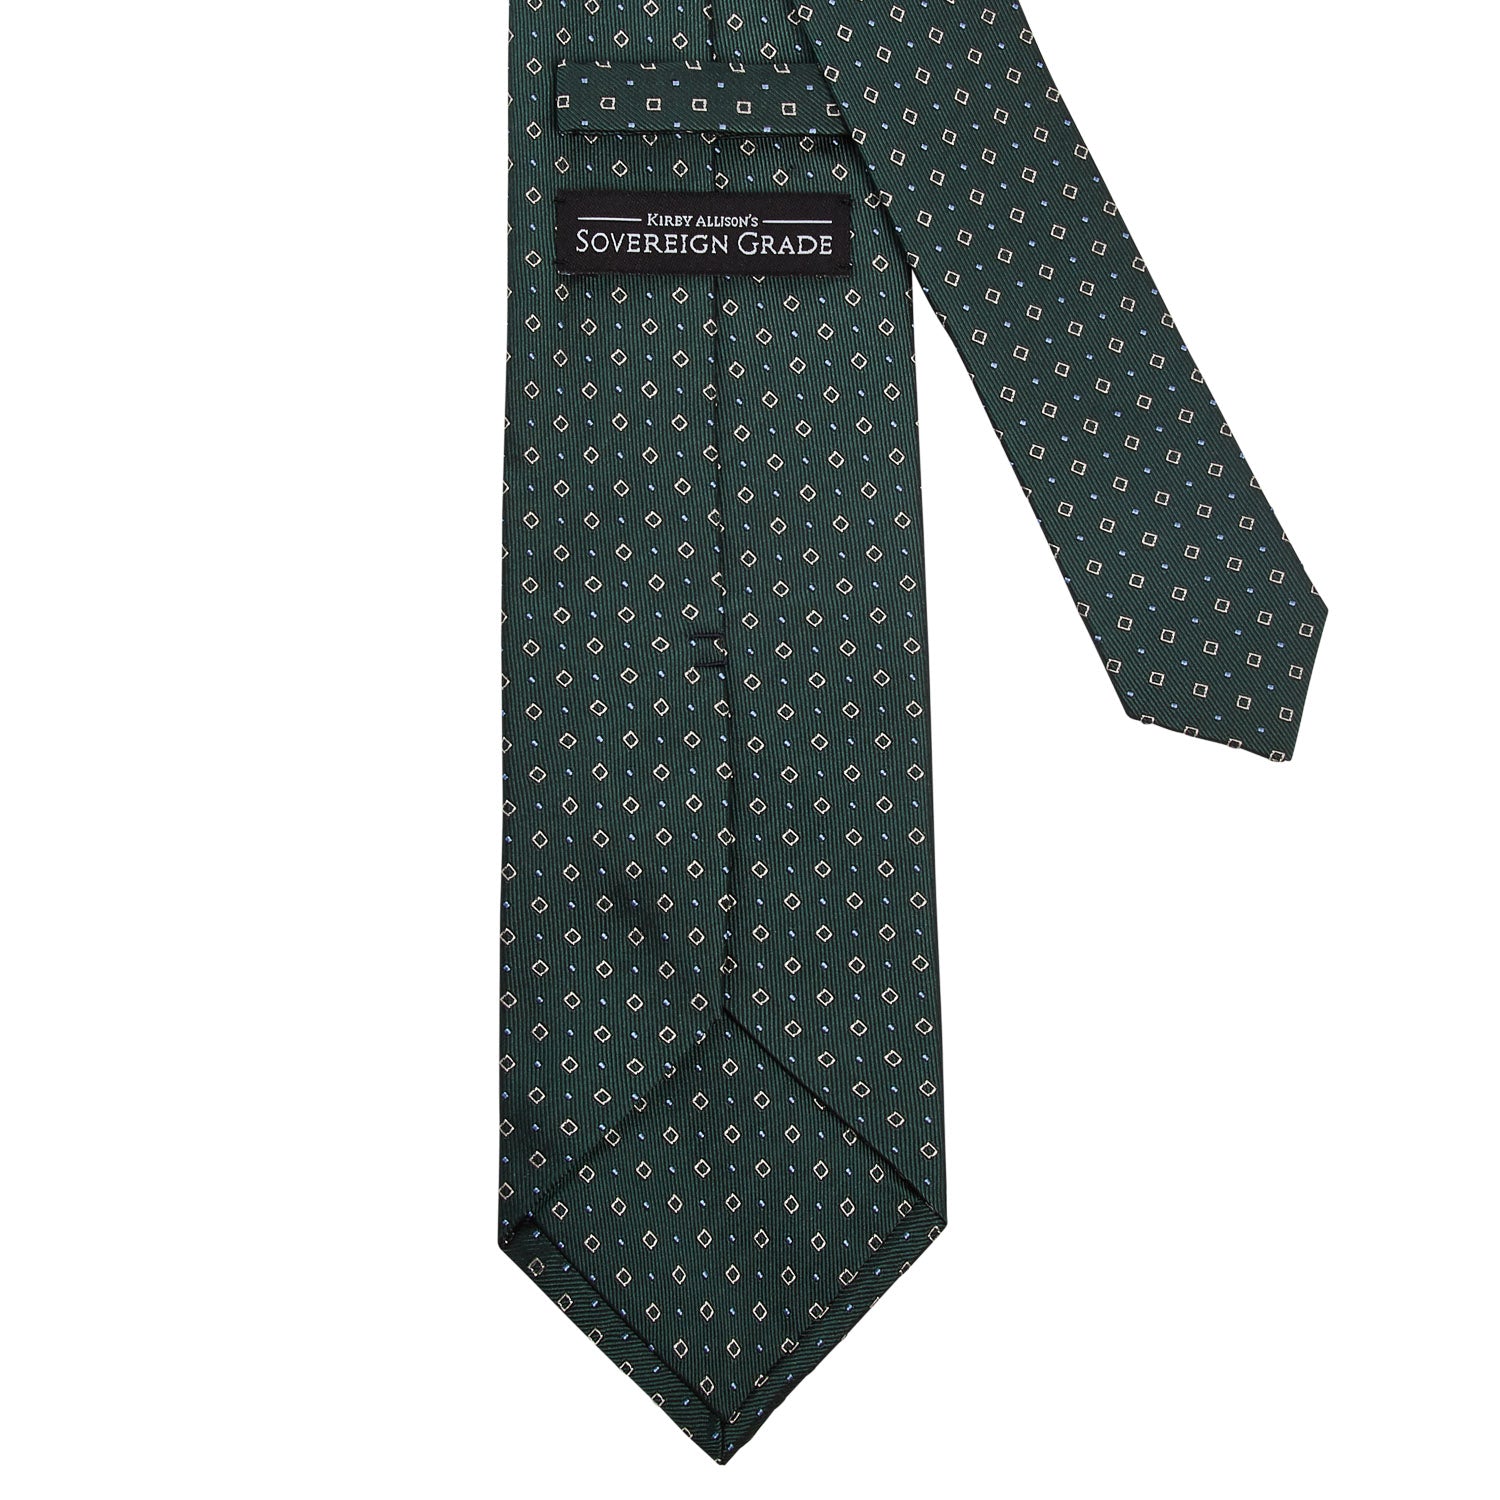 A Sovereign Grade Forest Green Alternating Square Dot Jacquard Tie from KirbyAllison.com on a white background.